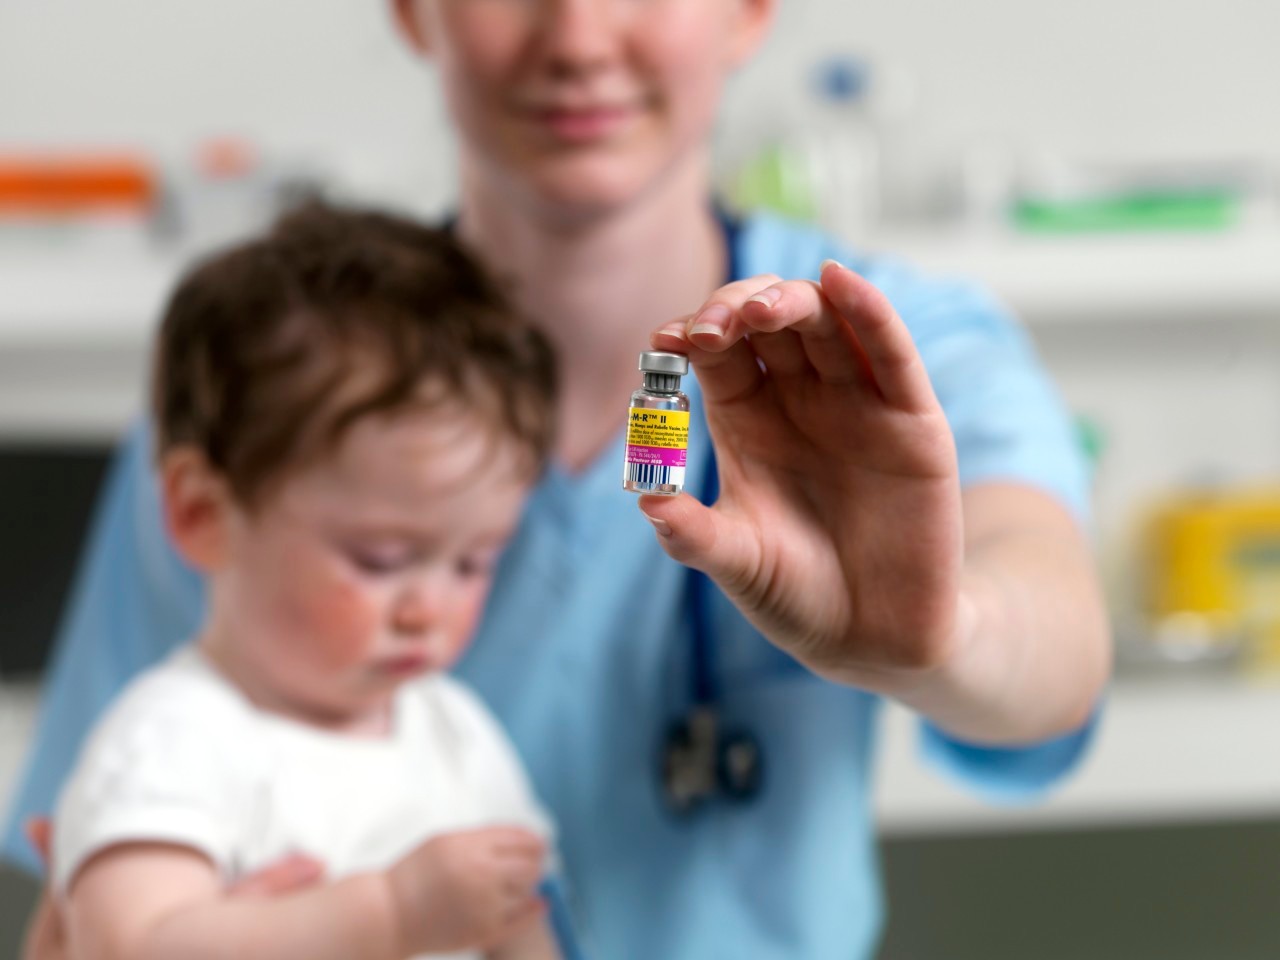 24 Aug 2010 --- MMR vaccine. Paediatrician with a phial of MMR vaccine and a 15 month old boy. --- Image by © TEK IMAGE/Science Photo Library/Corbis